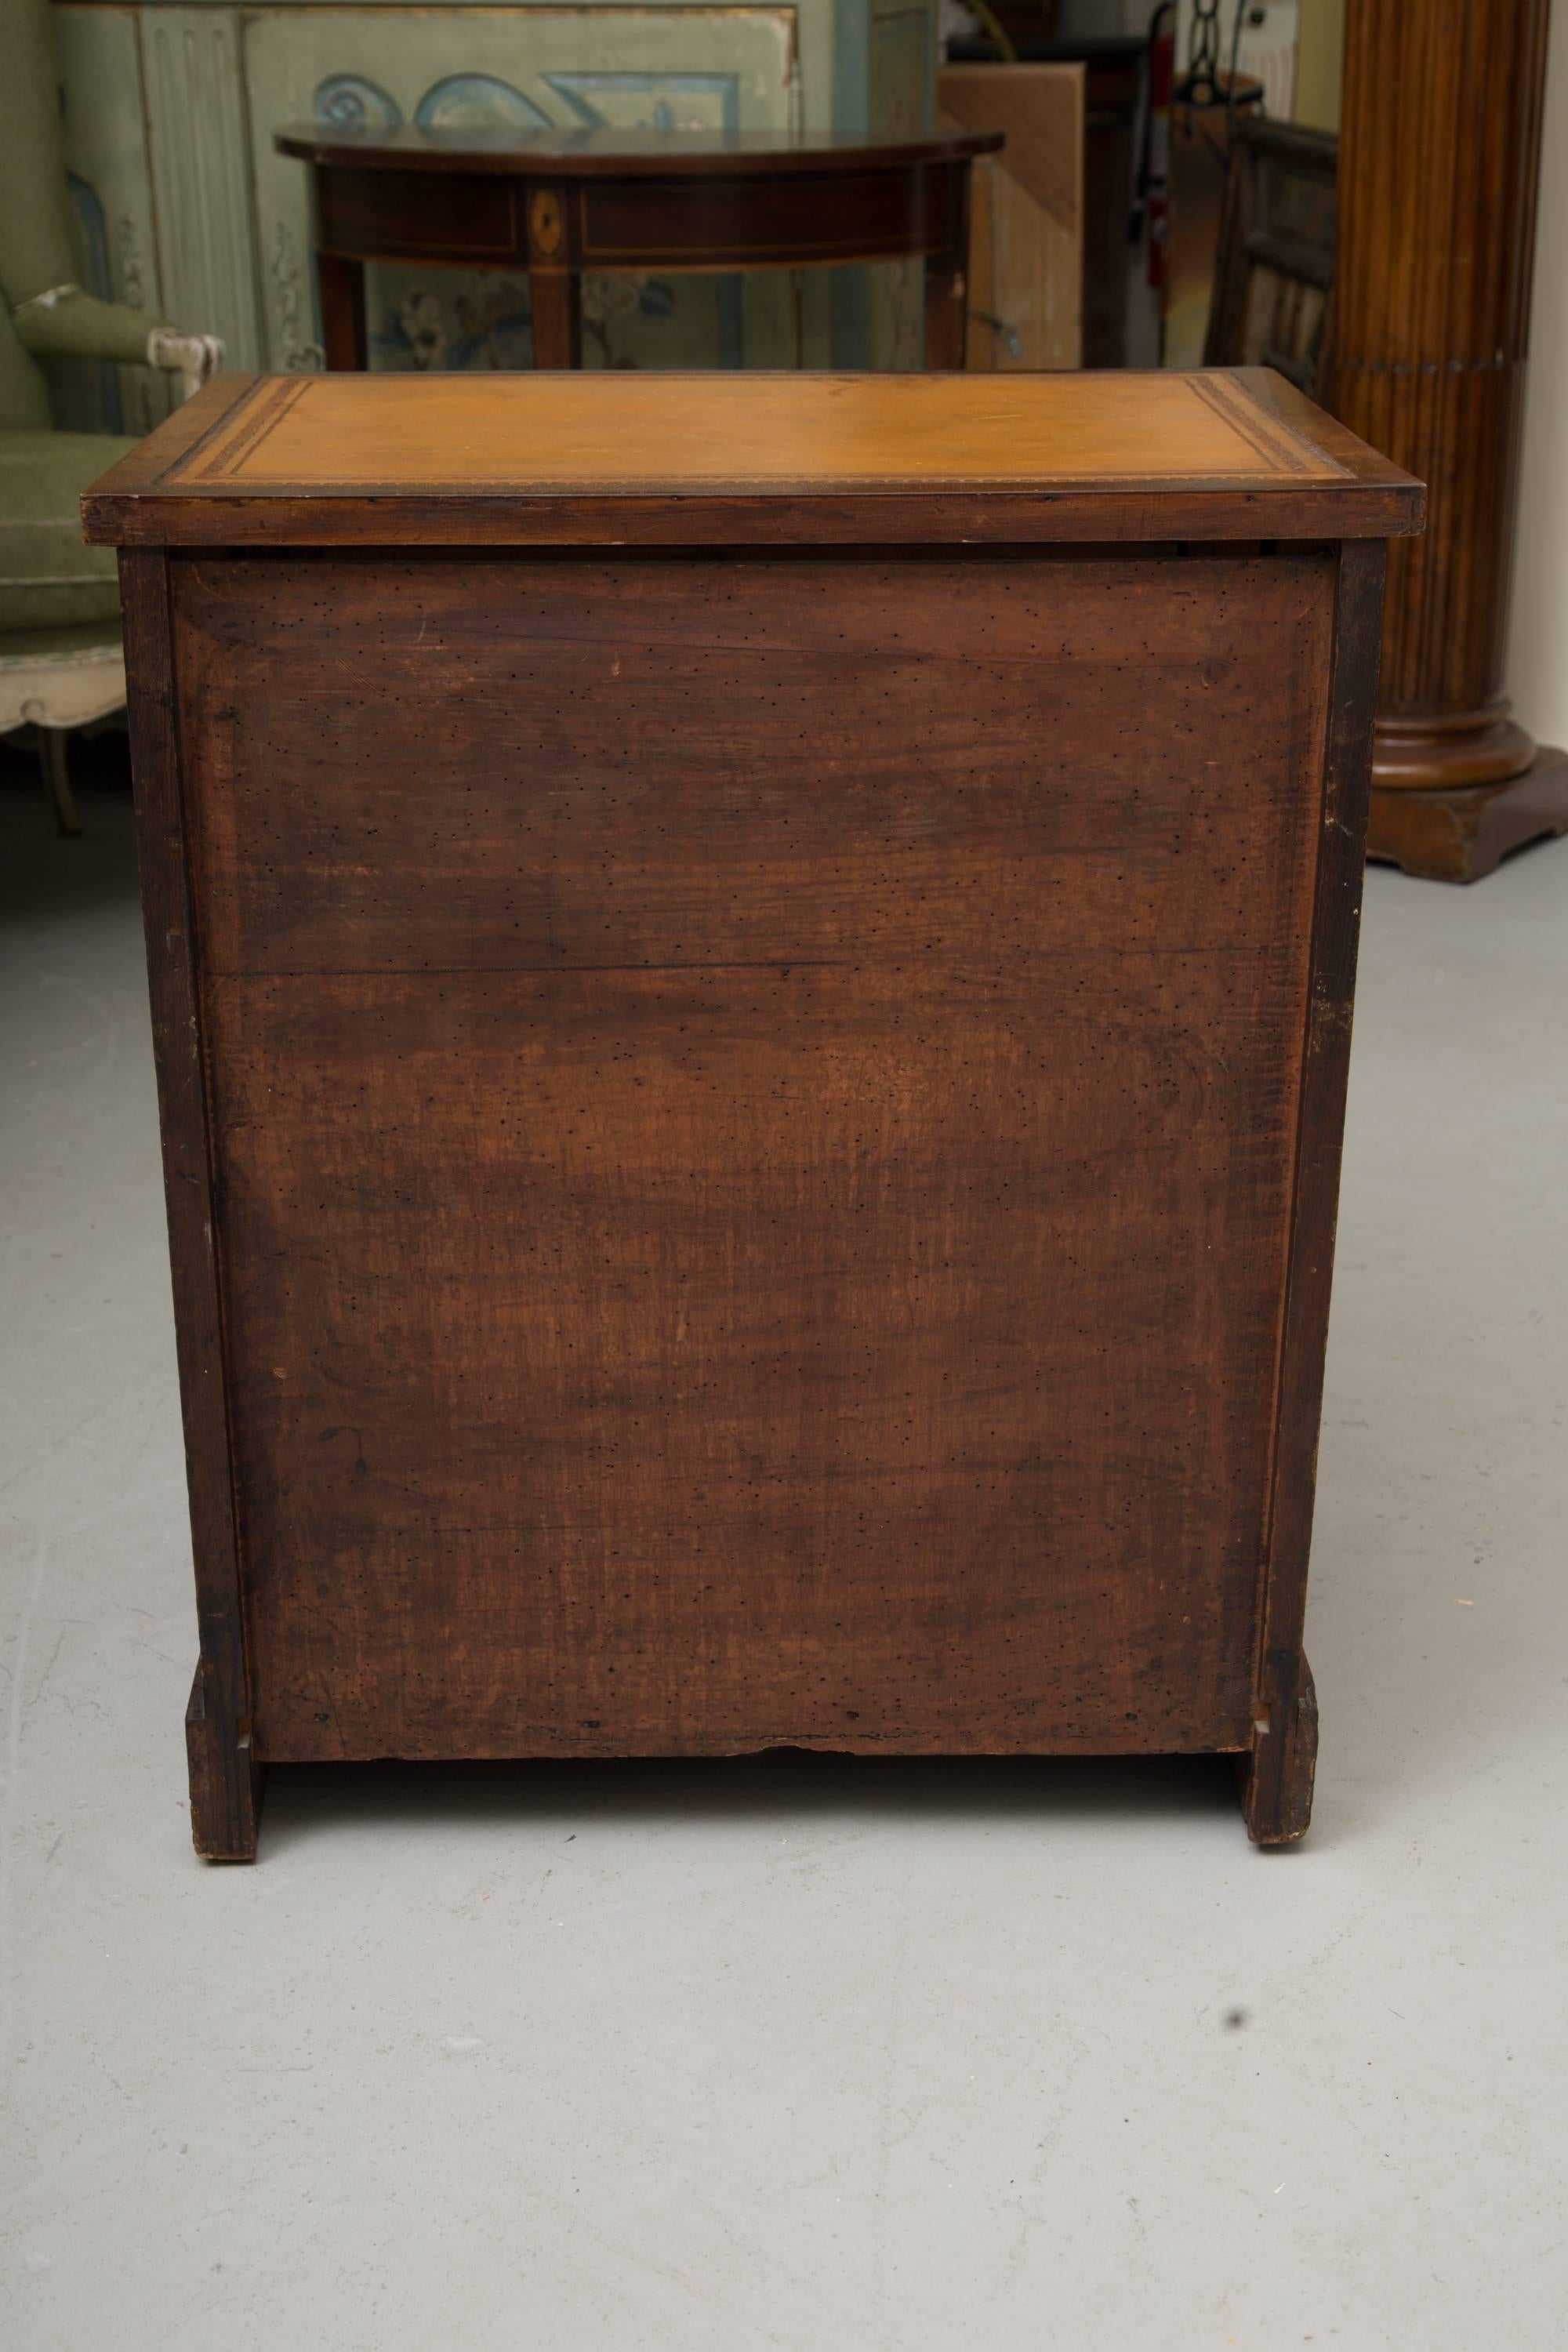 This is an unusual English Regency mahogany knee hole desk, the top with leather inset, above a frieze drawer flanked by a pair of pilasters with brass capitals and collars, situated on a plinth base, circa 1840.